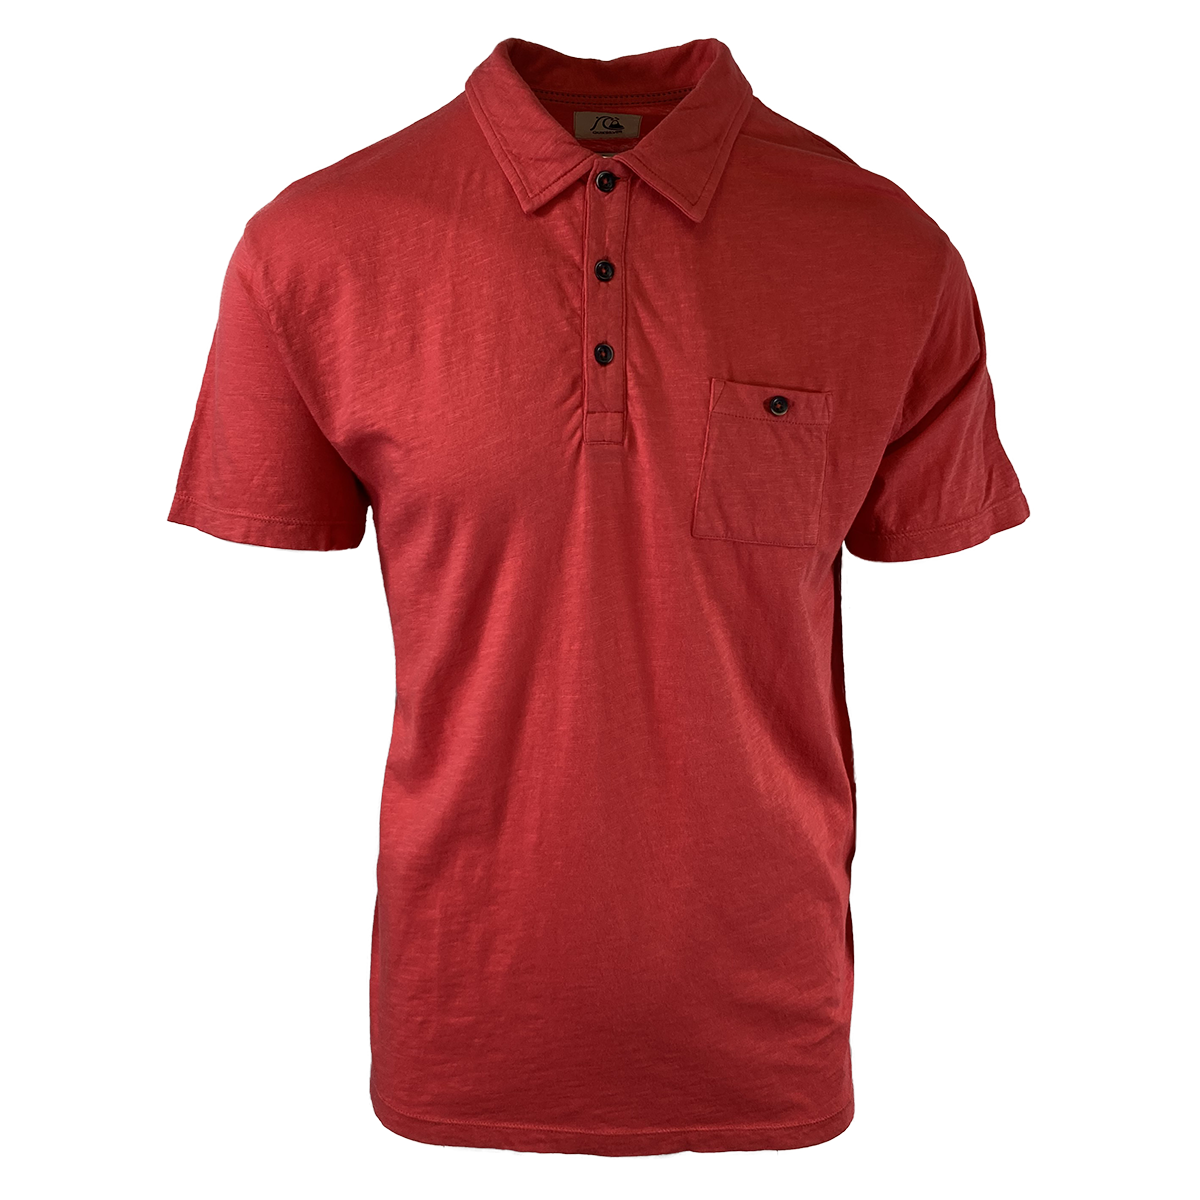 Quiksilver Men's Bright Red Light Weight Modern Fit S/S Polo